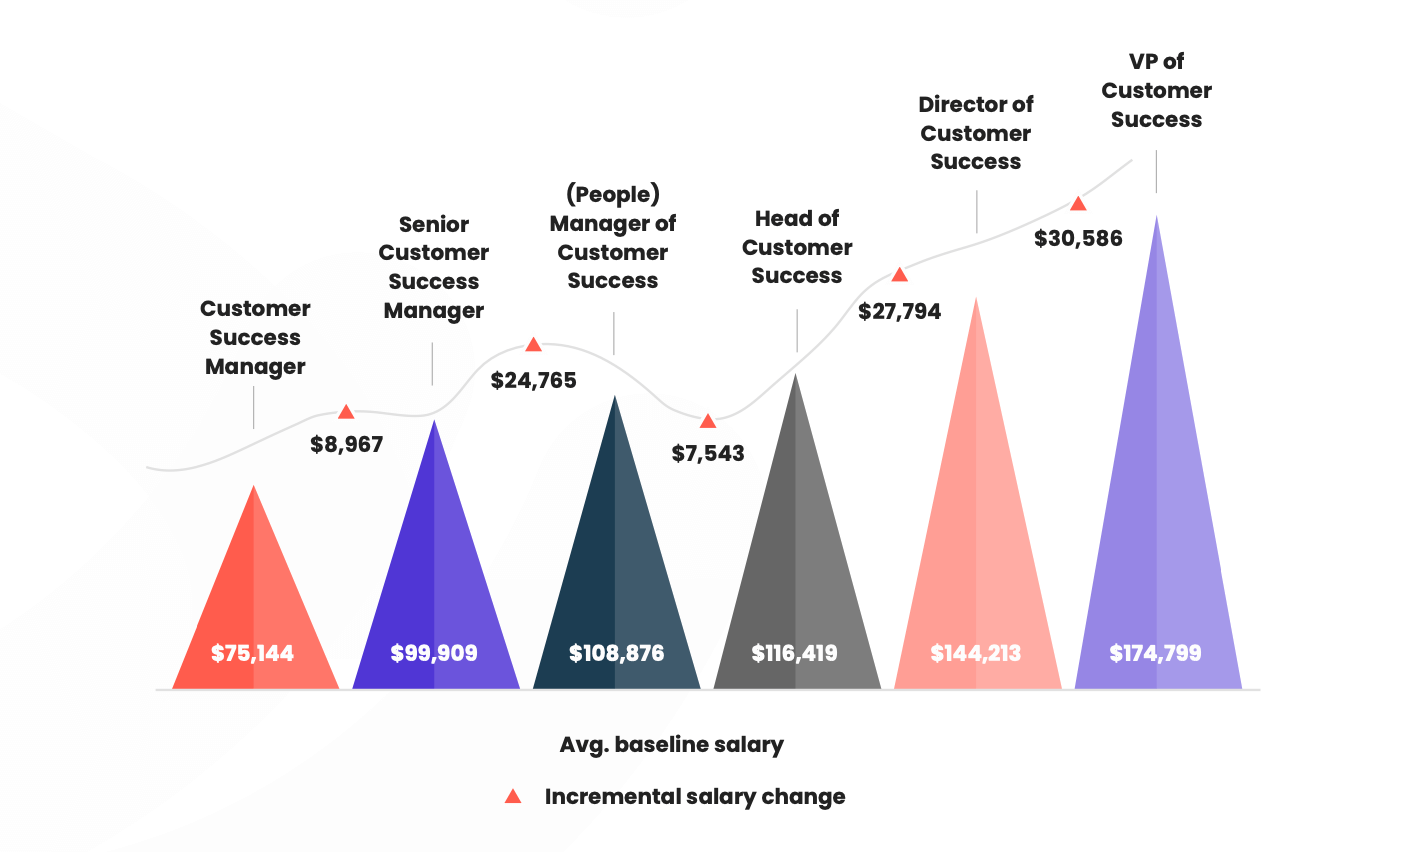 A graph showing the incremental salary change between Customer Success Managers, Senior Customer Success Managers, (People) Managers of Customer Success, Heads of Customer Success, Directors of Customer Success and VPs of Customer Success. 